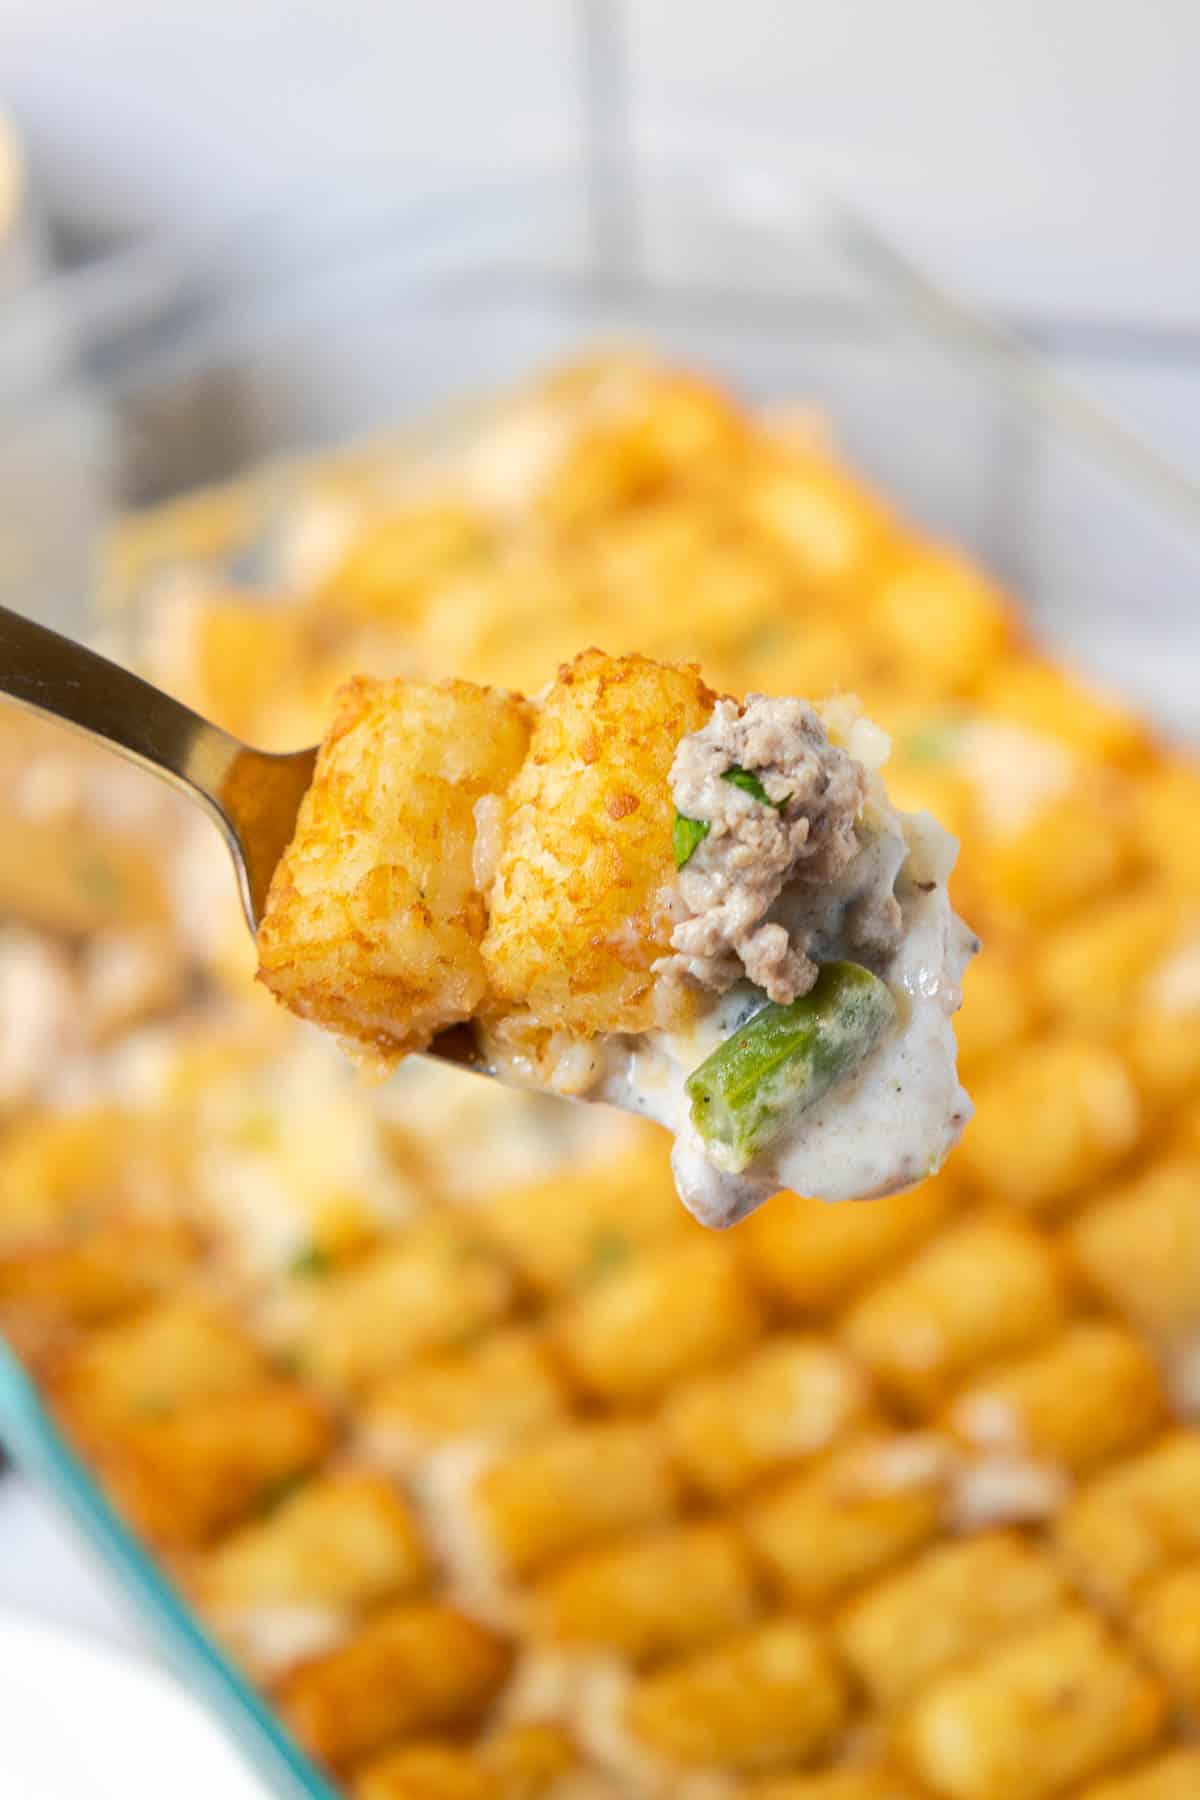 A bite of green bean tater tot casserole showing cut green beans, ground beef, and crispy tater tots.